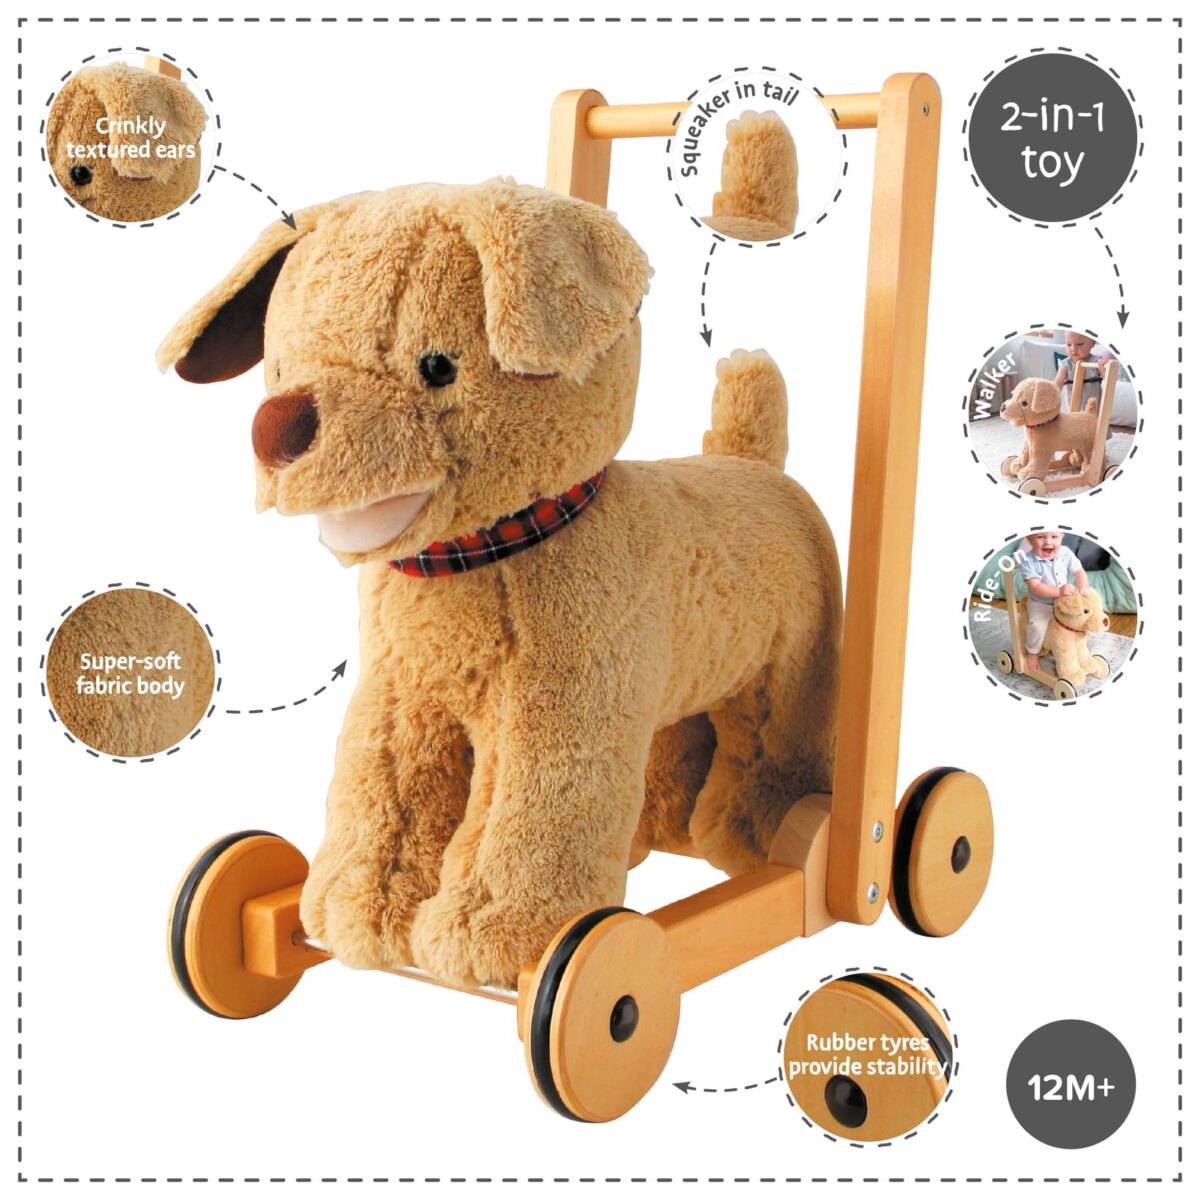 Features and benefits displayed for Dexter Dog Baby Walker